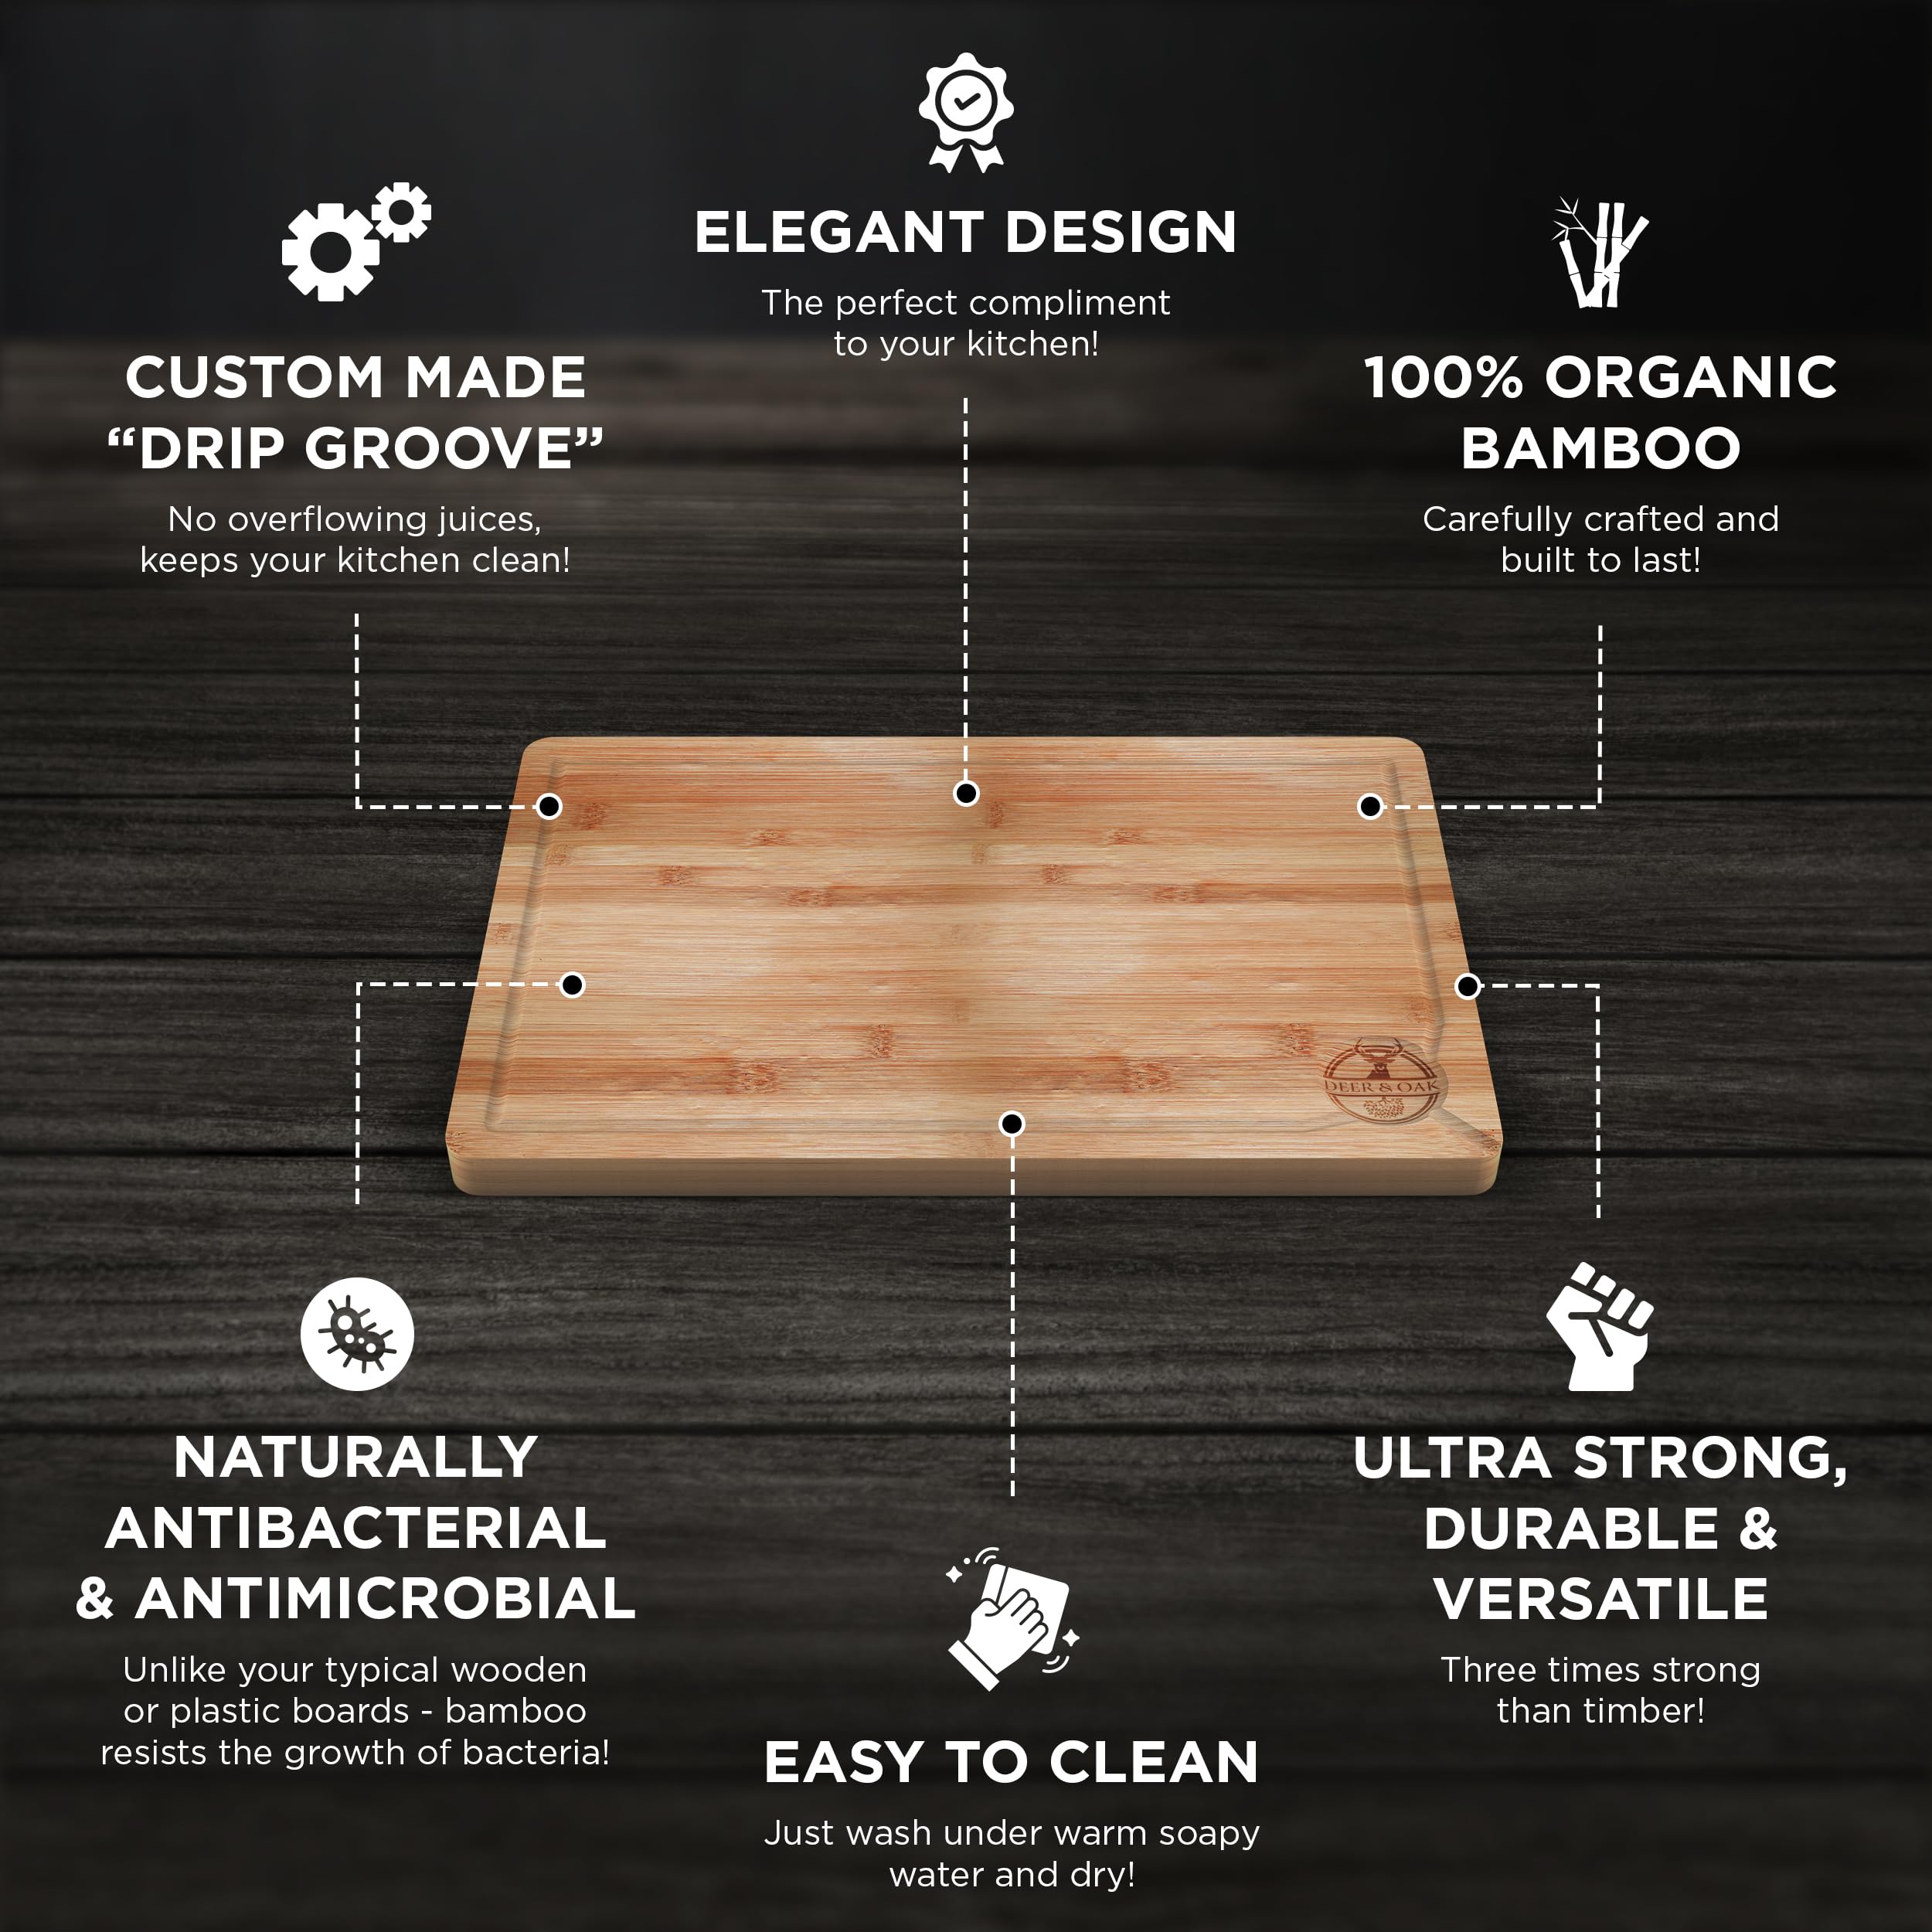 Deer & Oak - Premium Wooden Chopping Board - Large 38 x 25 x 2 cm Bamboo Cutting Board for Carving Meat or Vegetables - Chopping Boards for Kitchens - Pre Oiled, Treated, Attractive Wood